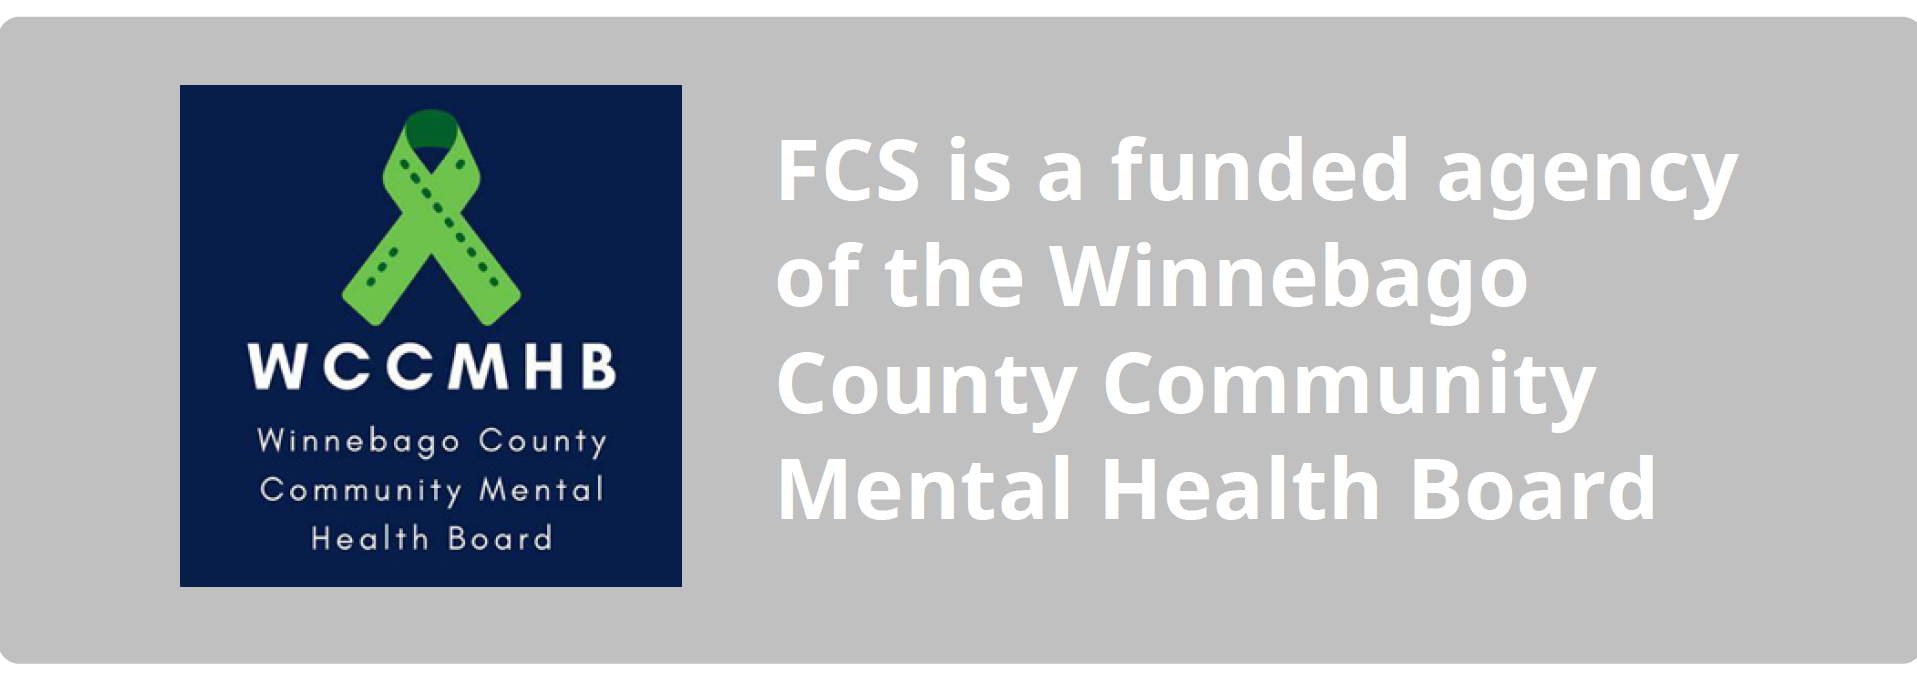 FCS is a funded agency of the Winnebago County Community Mental Health Board